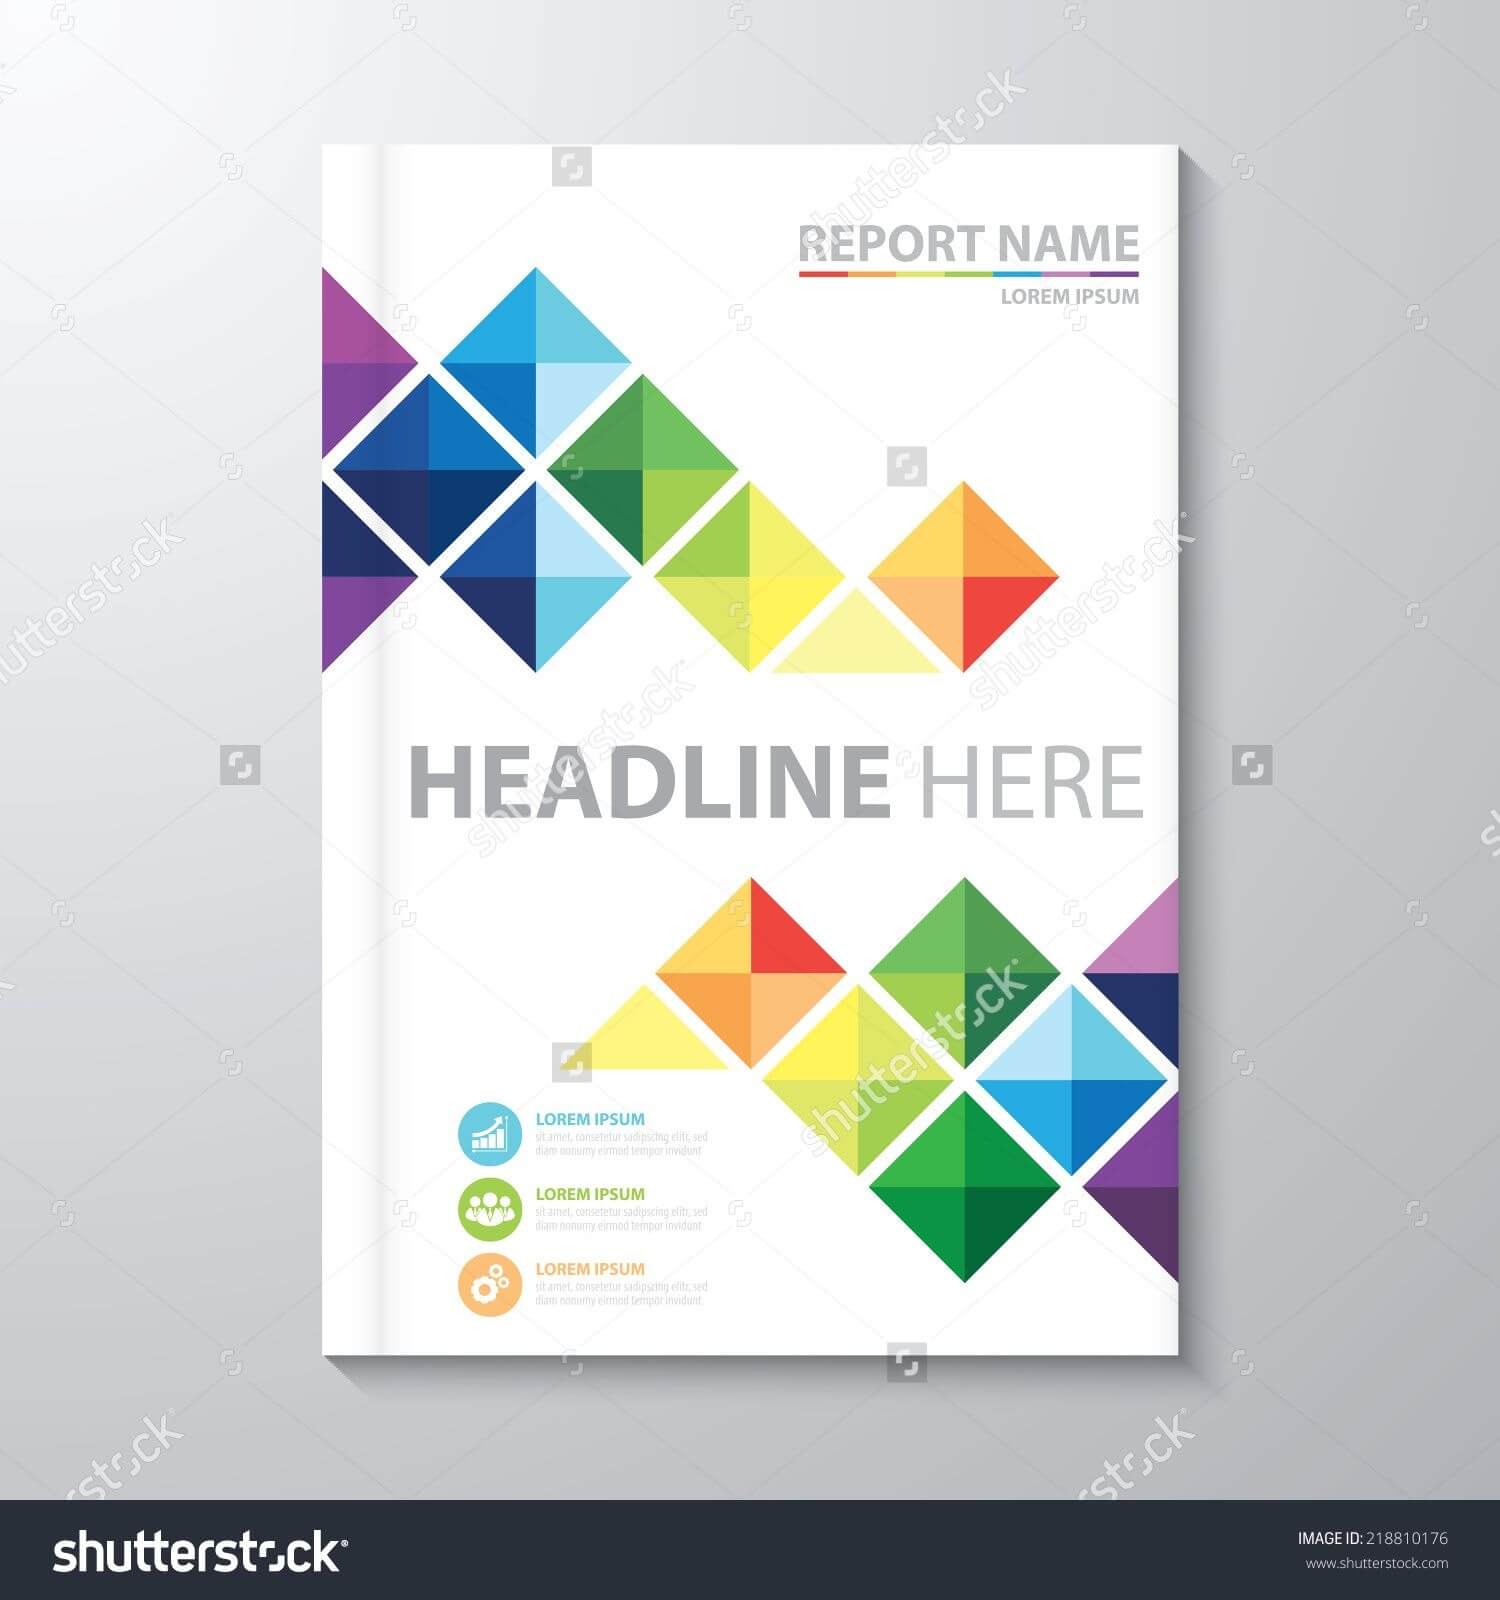 Abstract Colorful Triangle Background. Cover Design Template Within Report Cover Page Template Word